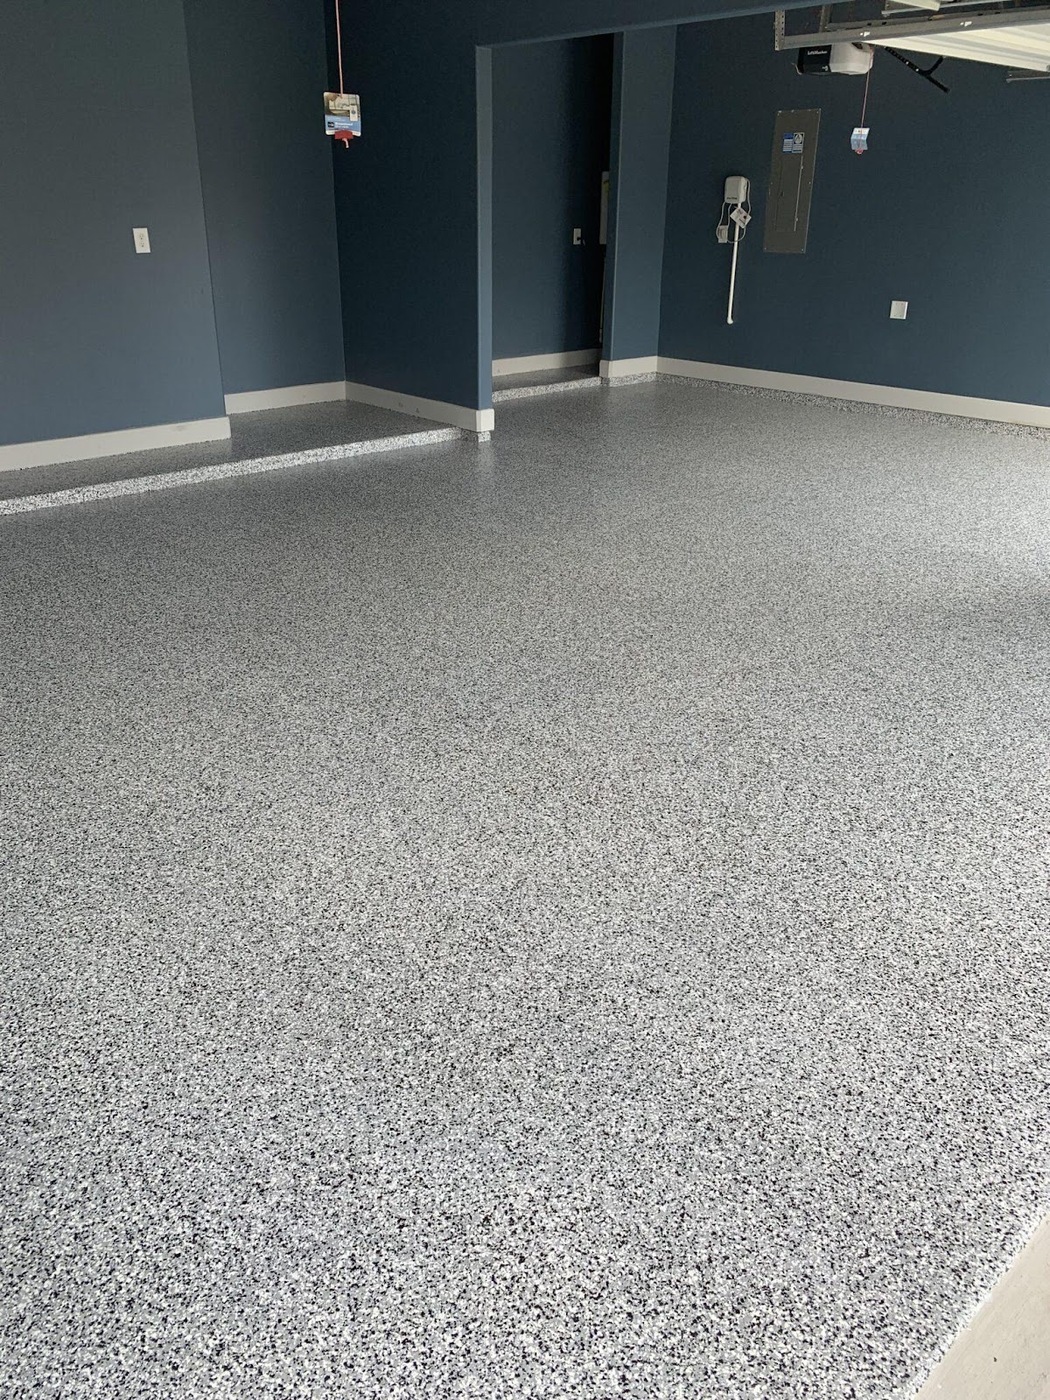 Floor Shield Knoxville offers the best garage flooring coatings and concrete floor coatings in Knoxville and surrounding areas.